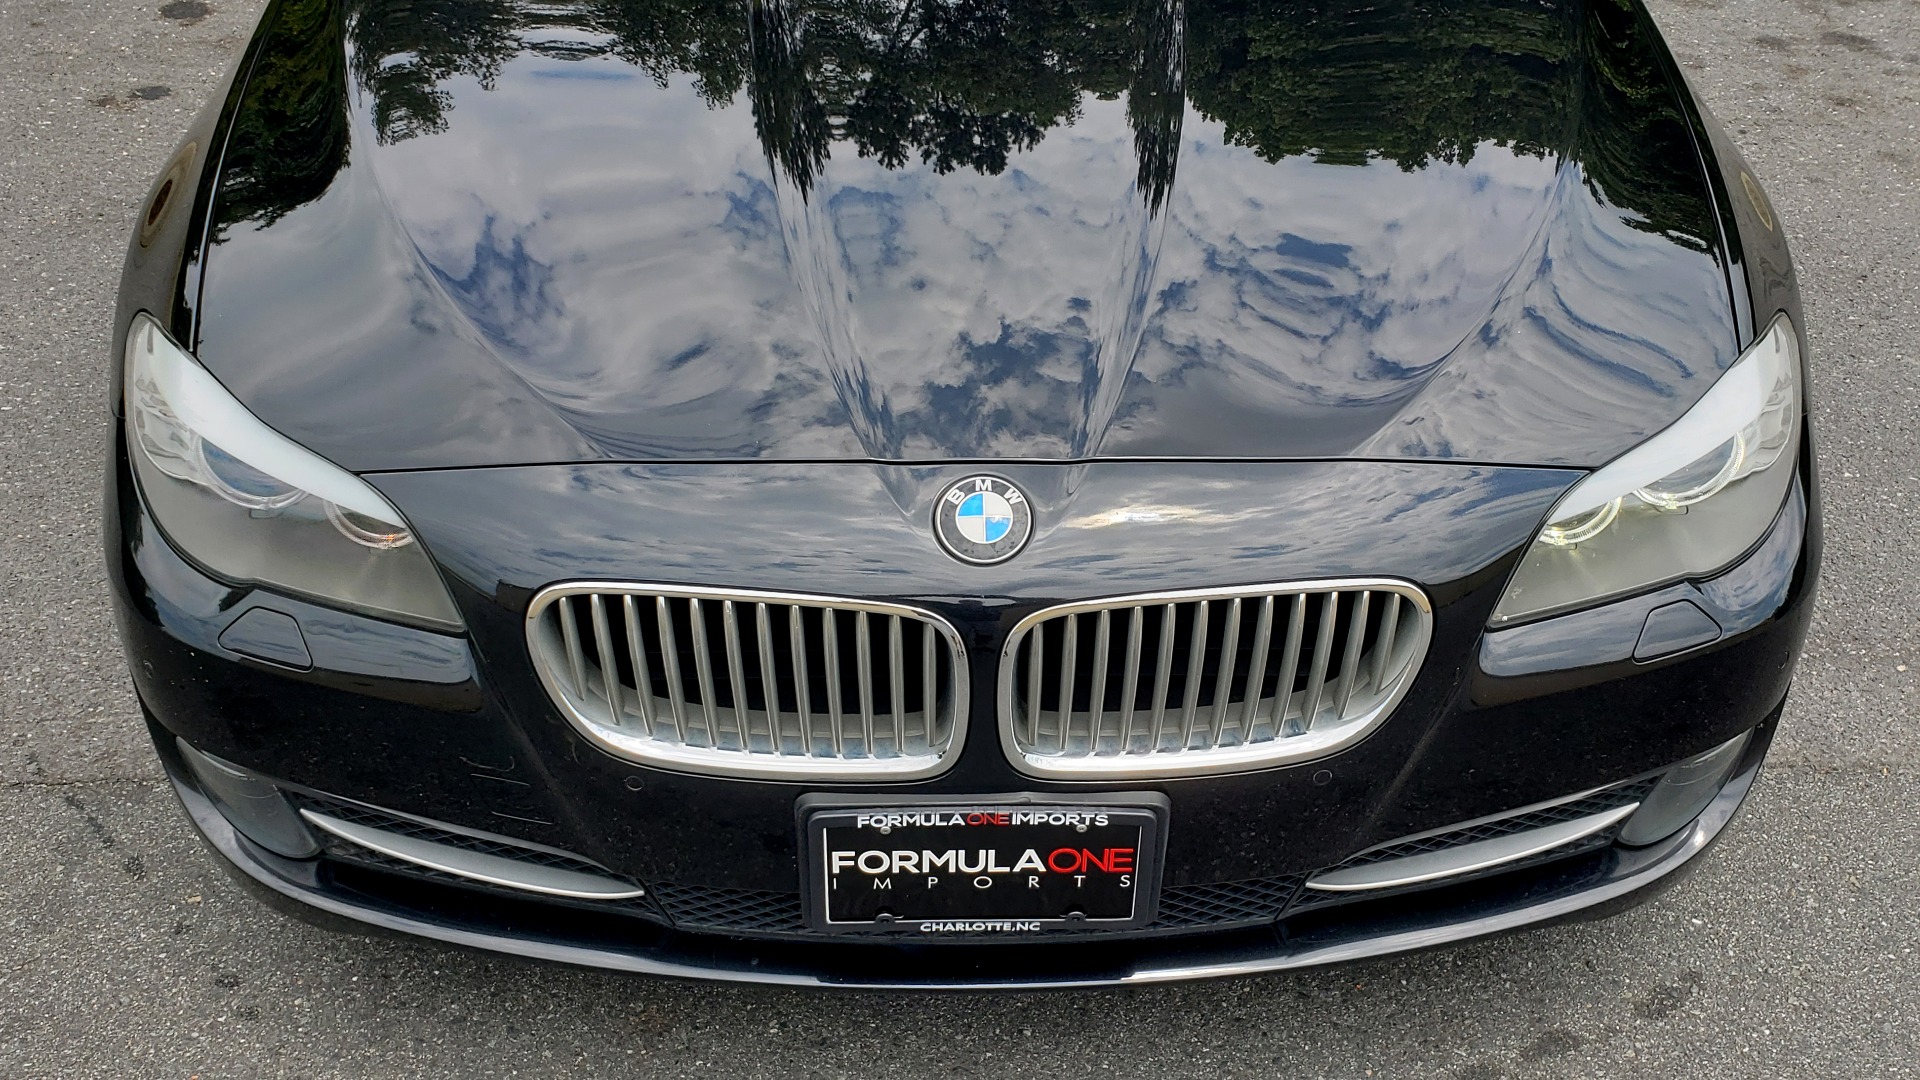 Used 2013 BMW 5 SERIES 550I XDRIVE LUX PKG / EXEC / COLD WTHR / NAV / SUNROOF / REARVIEW for sale Sold at Formula Imports in Charlotte NC 28227 19